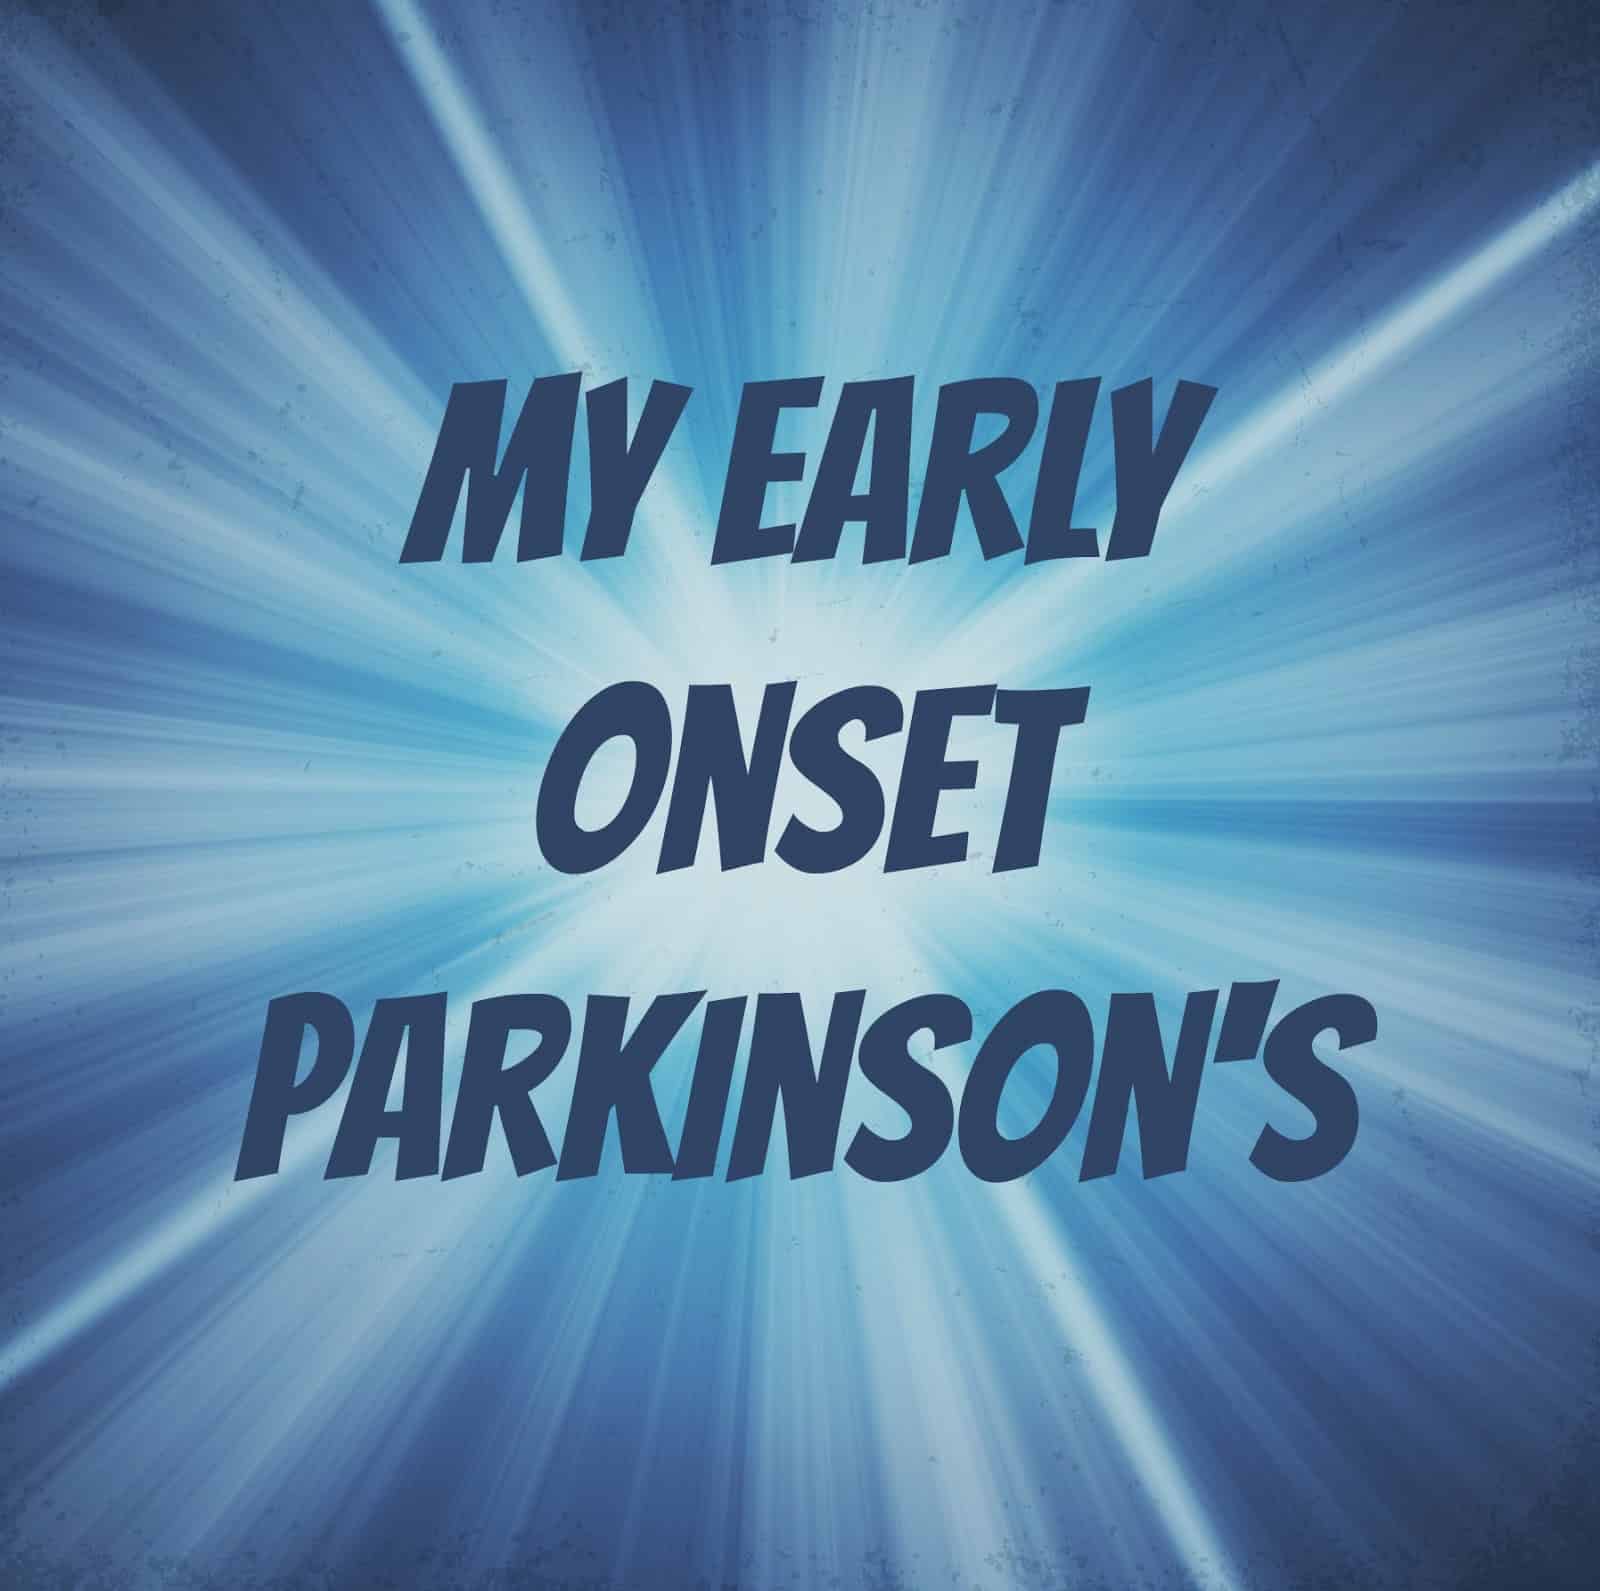 The Journey Unexpected: My Early Onset Parkinson